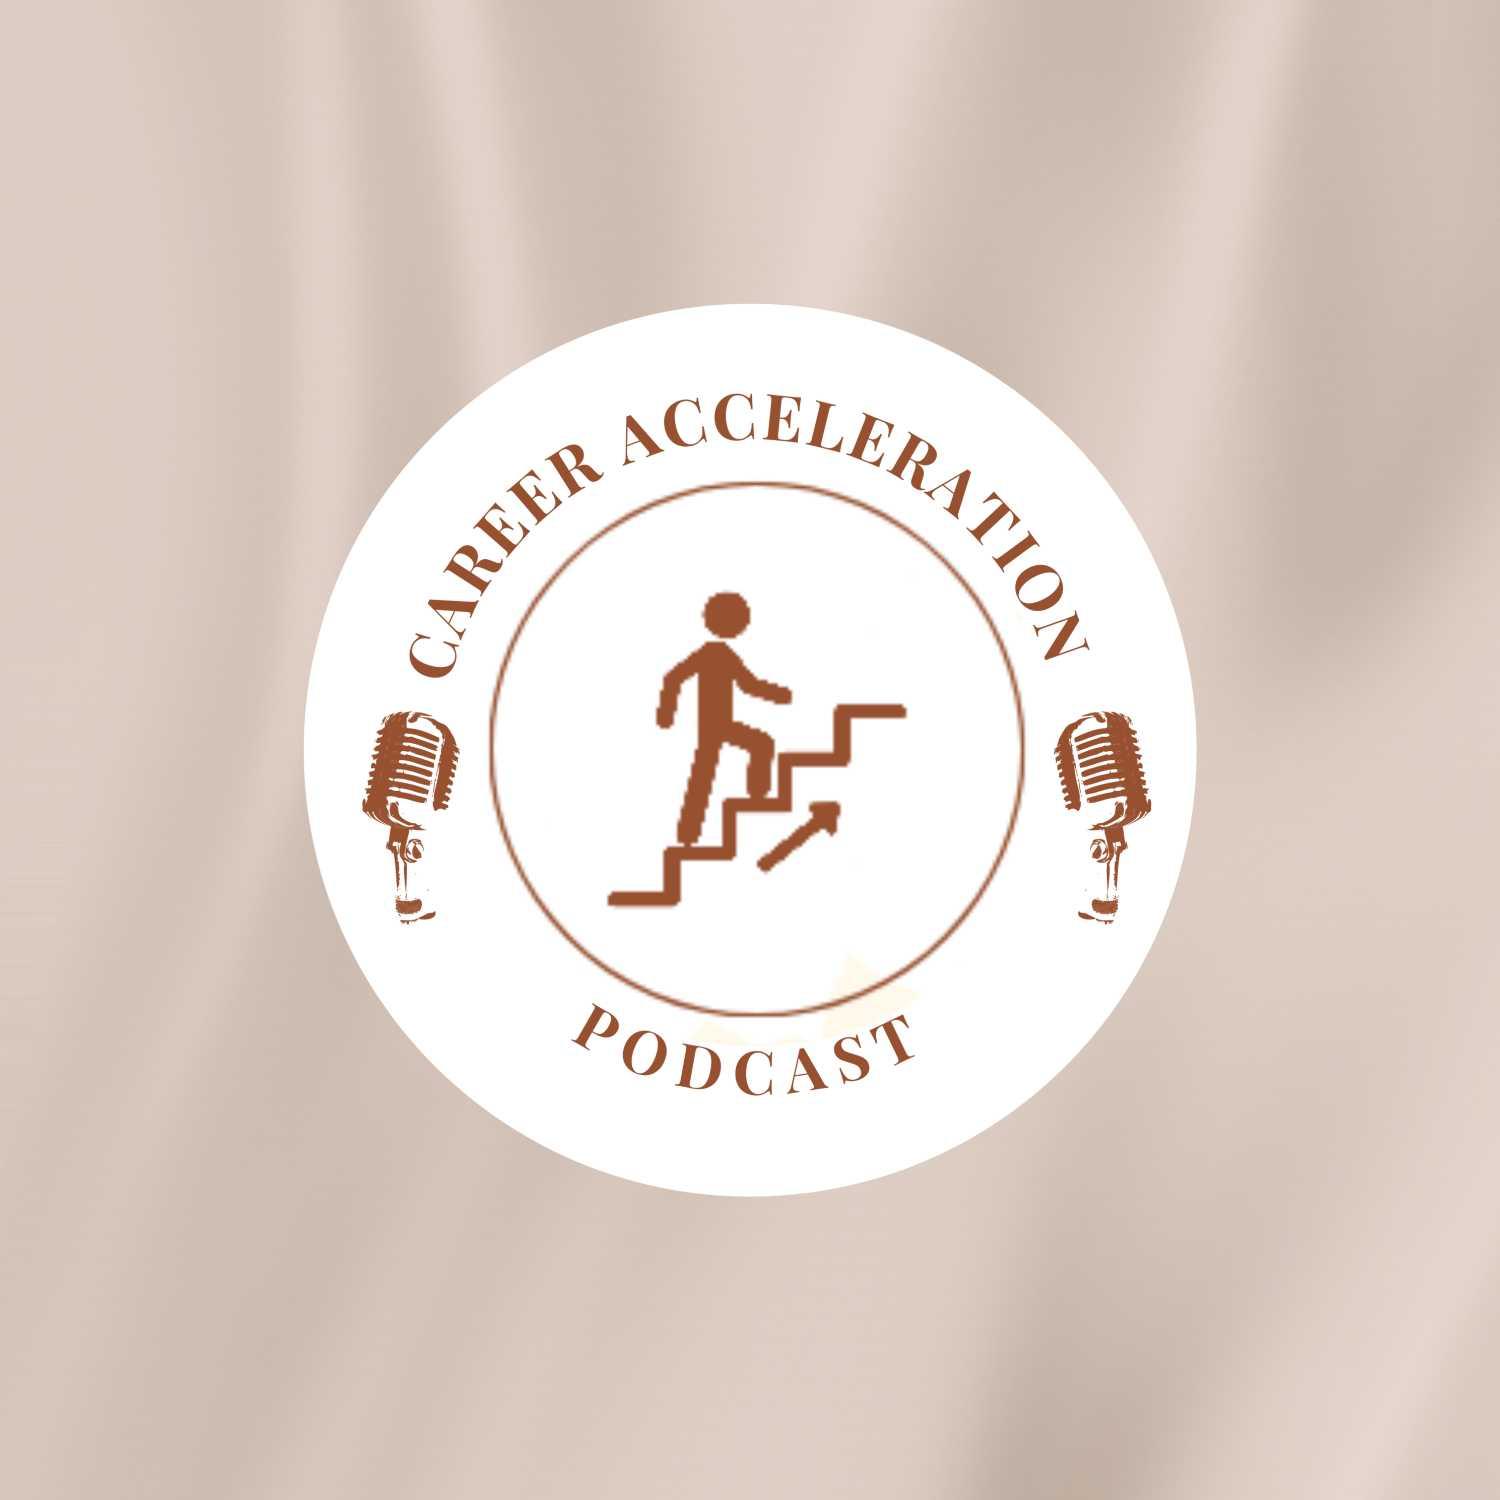 Career Acceleration Podcast